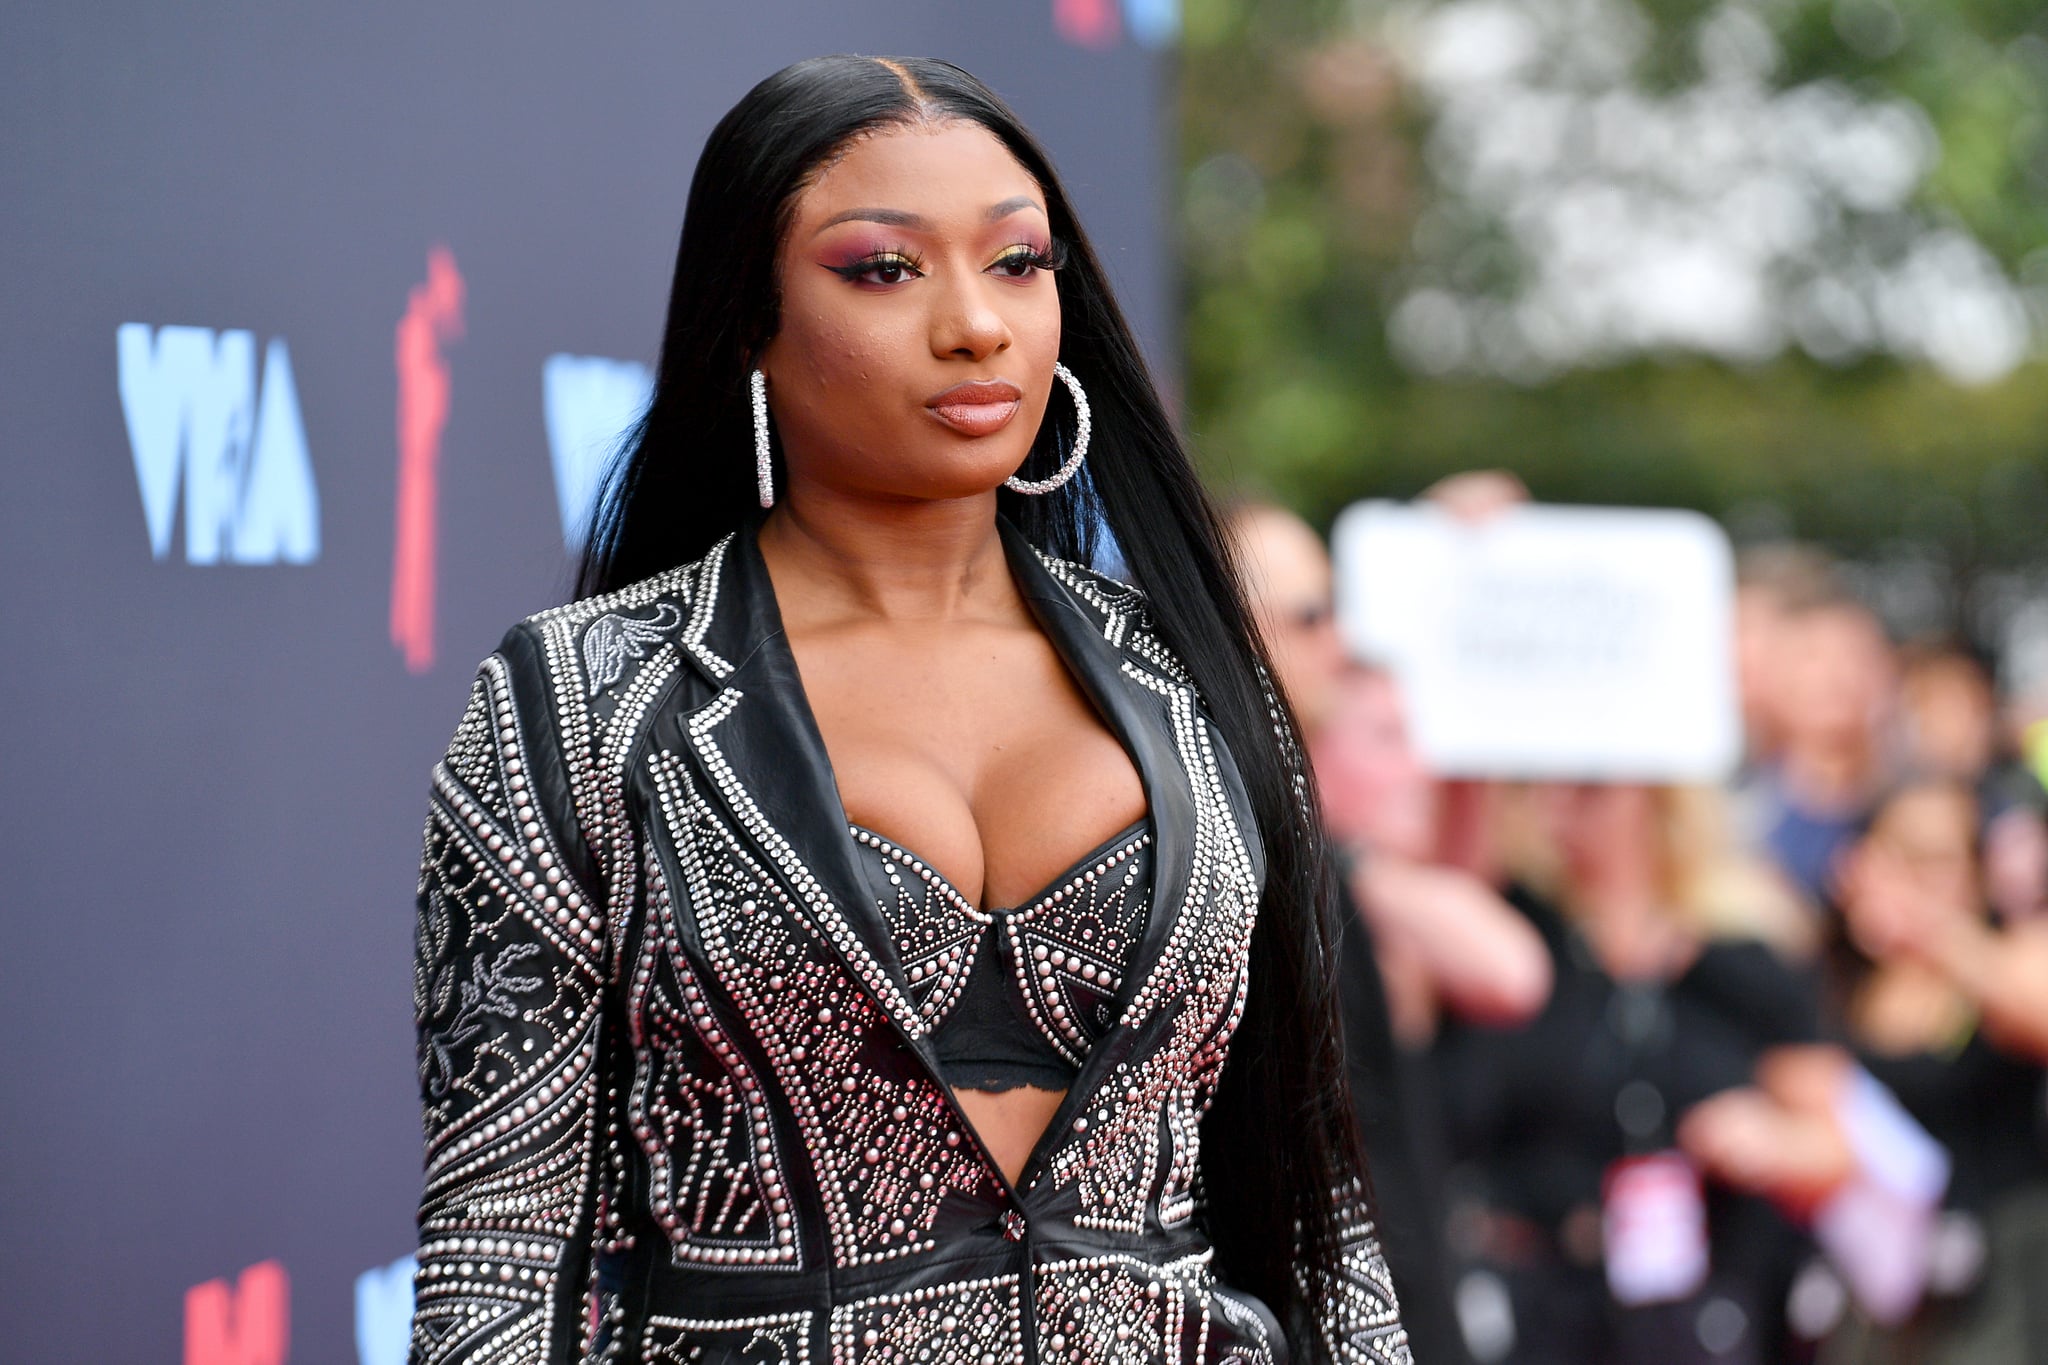 NEWARK, NEW JERSEY - AUGUST 26: Megan Thee Stallion attends the 2019 MTV Video Music Awards at Prudential Centre on August 26, 2019 in Newark, New Jersey. (Photo by Dia Dipasupil/Getty Images for MTV)